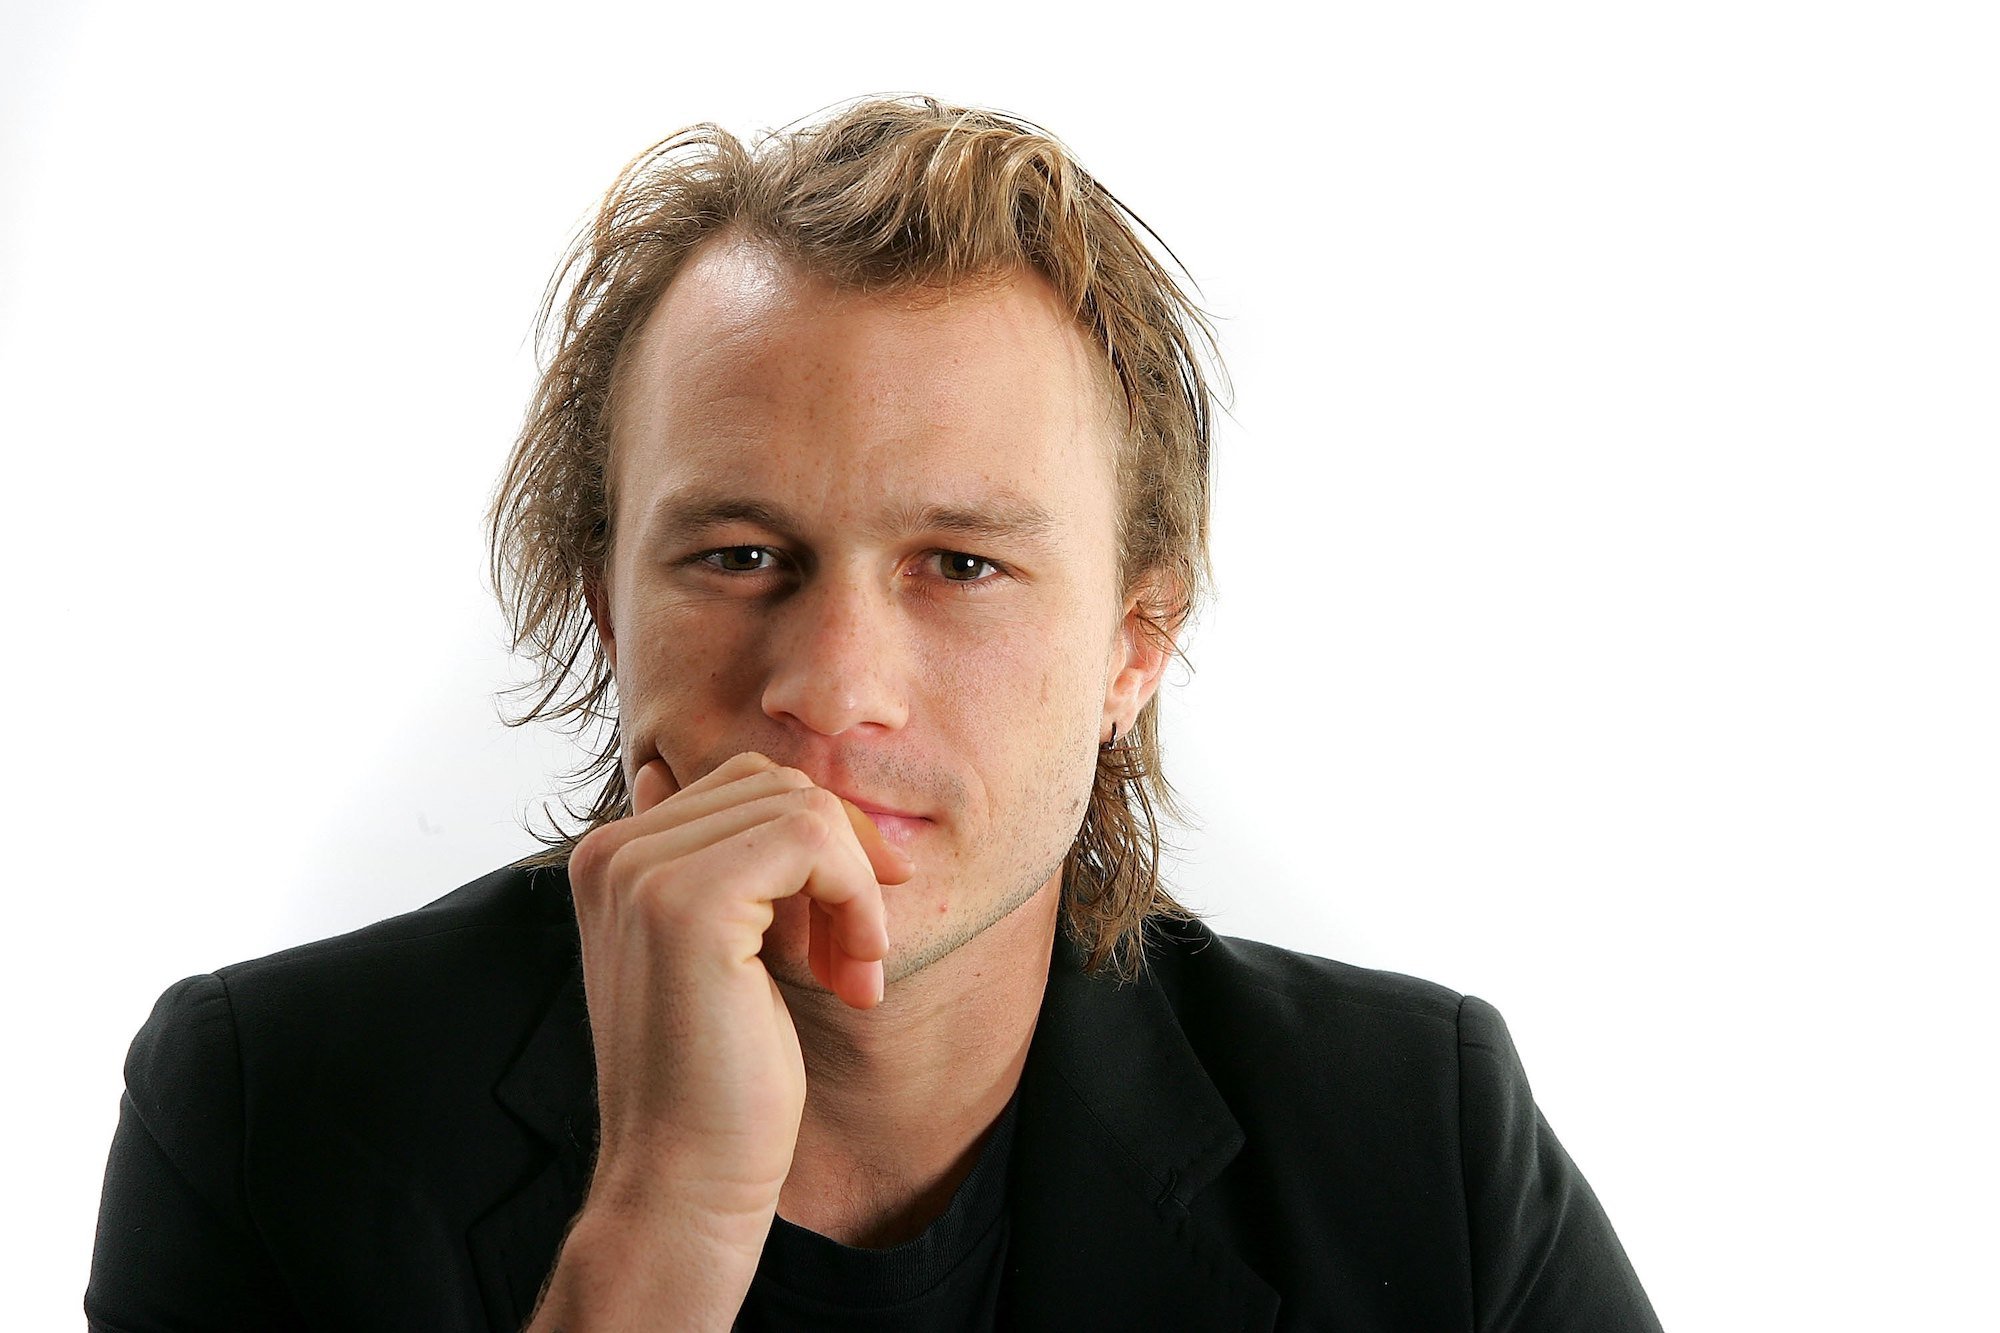 Heath Ledger Had Only 33 Minutes of Screen Time as The Joker and It Won Him an Oscar